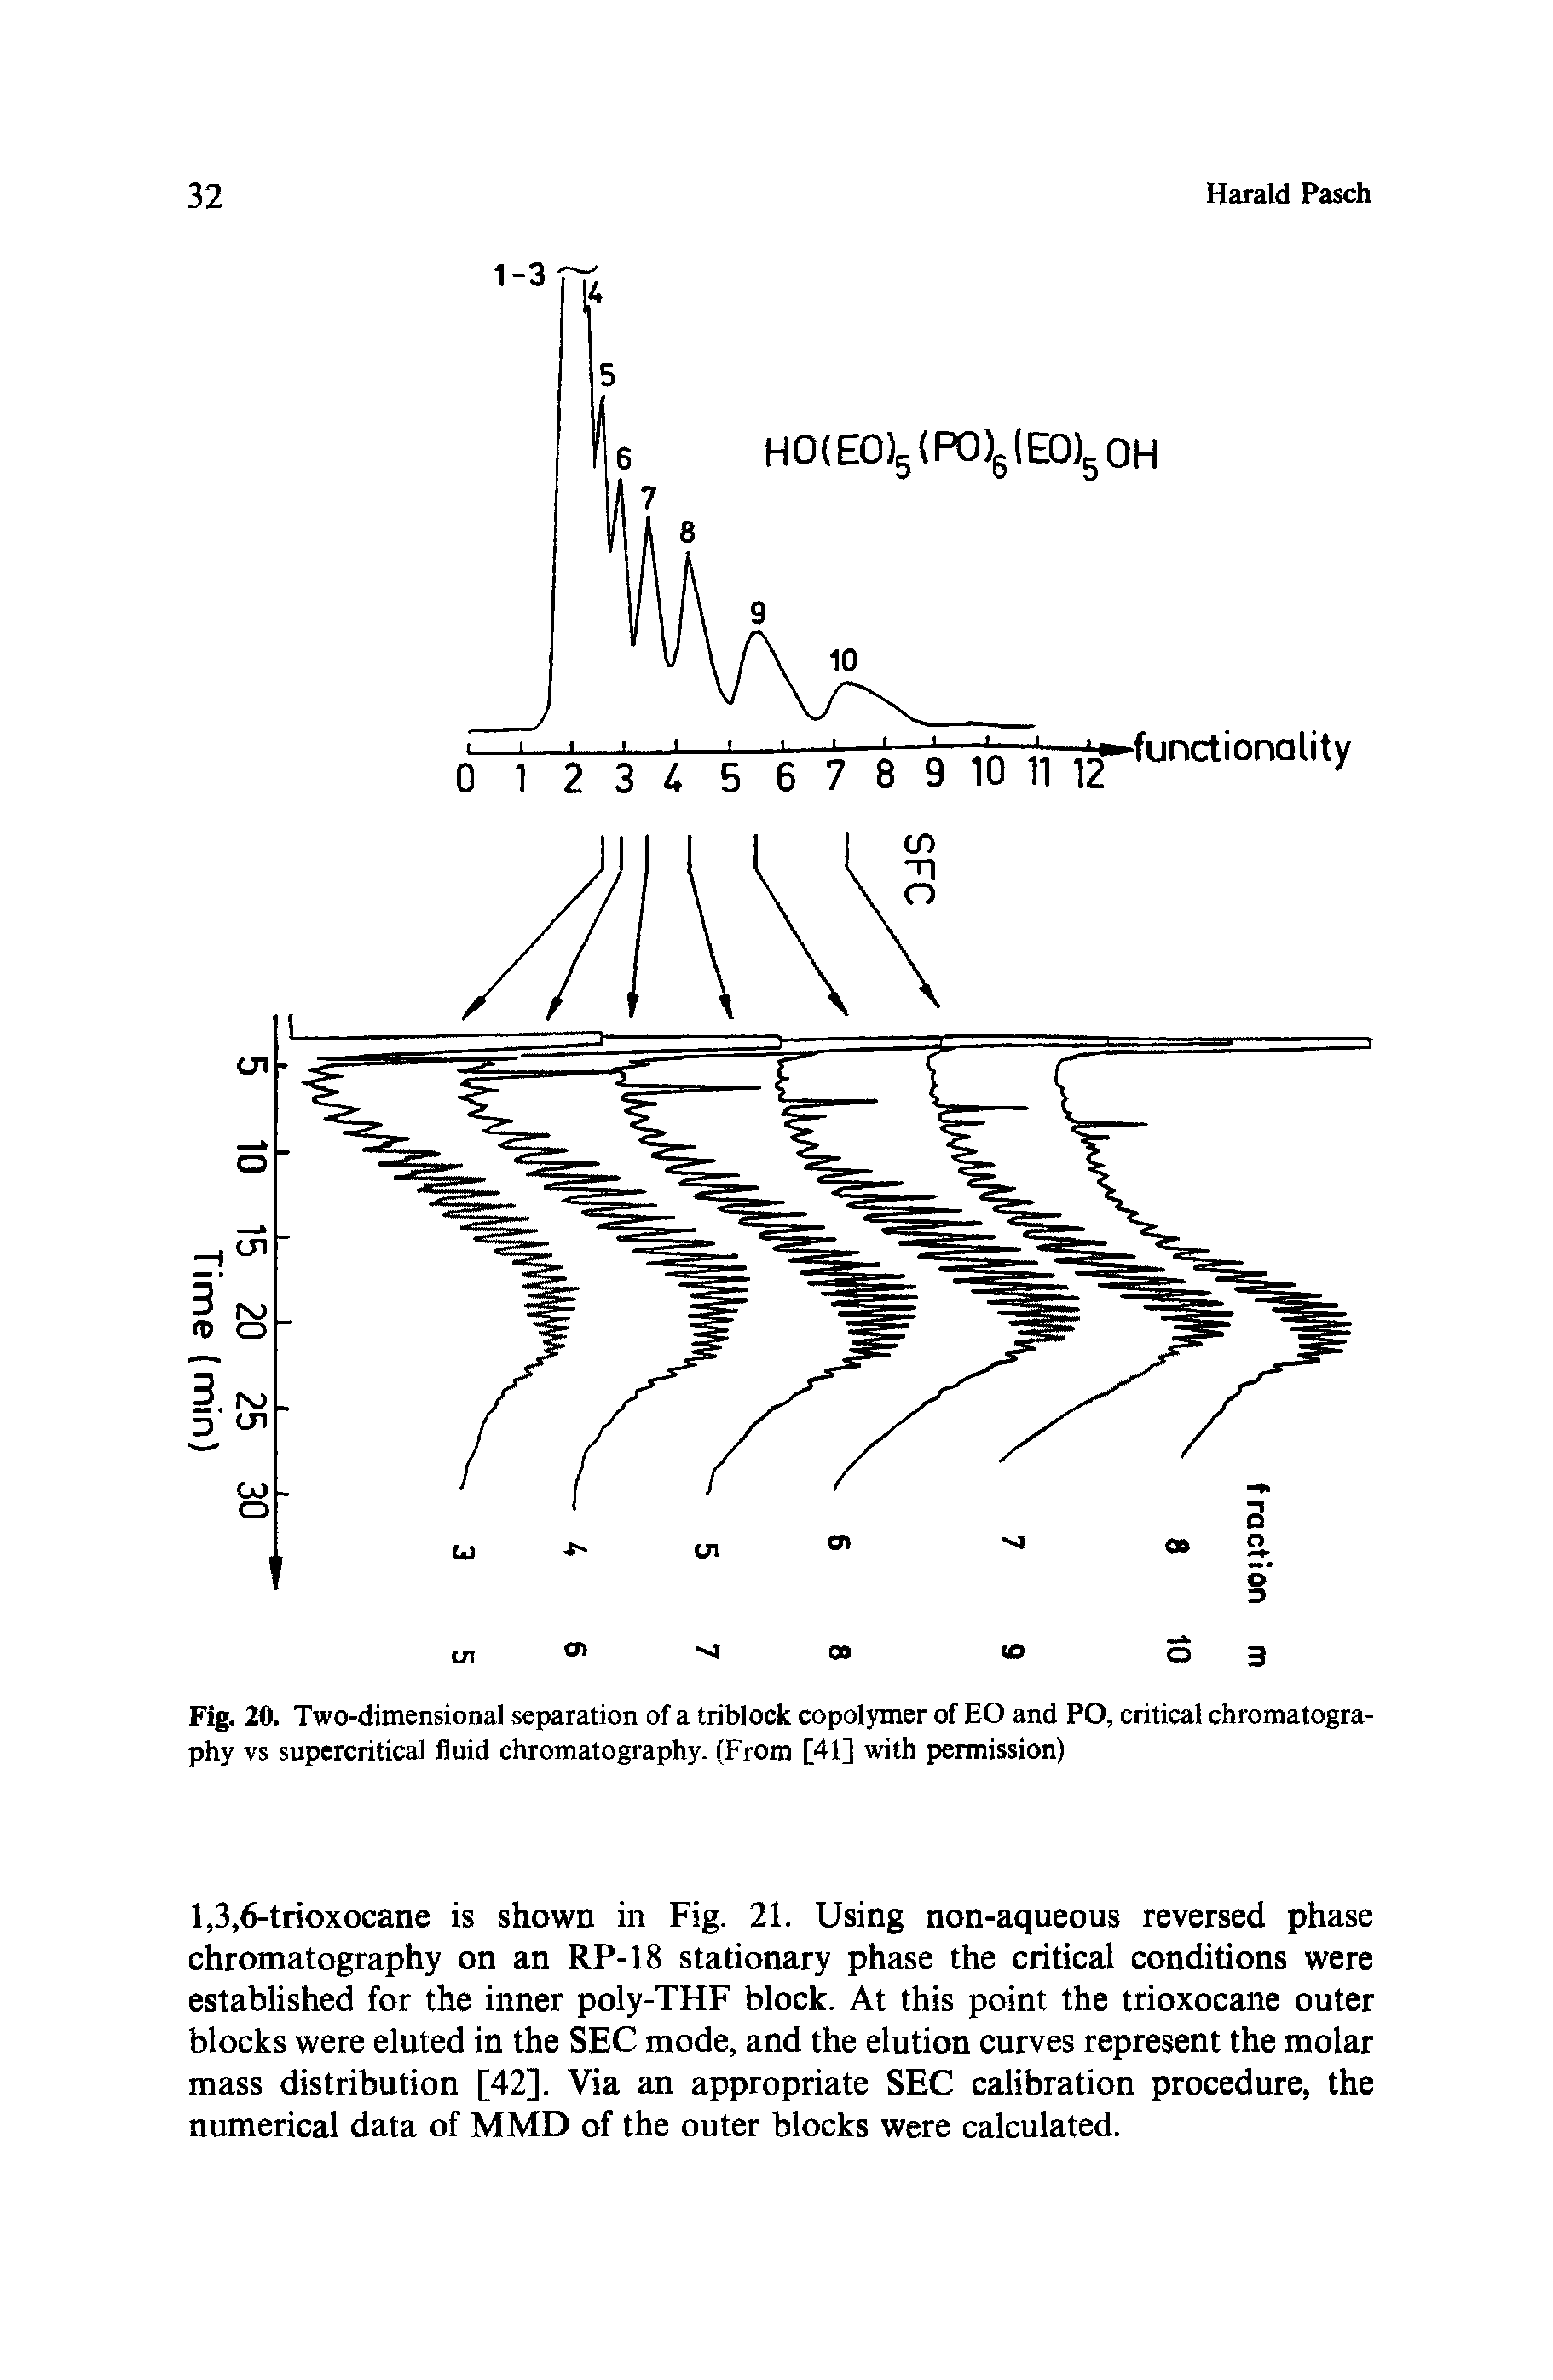 Fig. 20. Two-dimensional separation of a triblock copolymer of EO and PO, critical chromatography vs supercritical fluid chromatography. (From [41] with permission)...